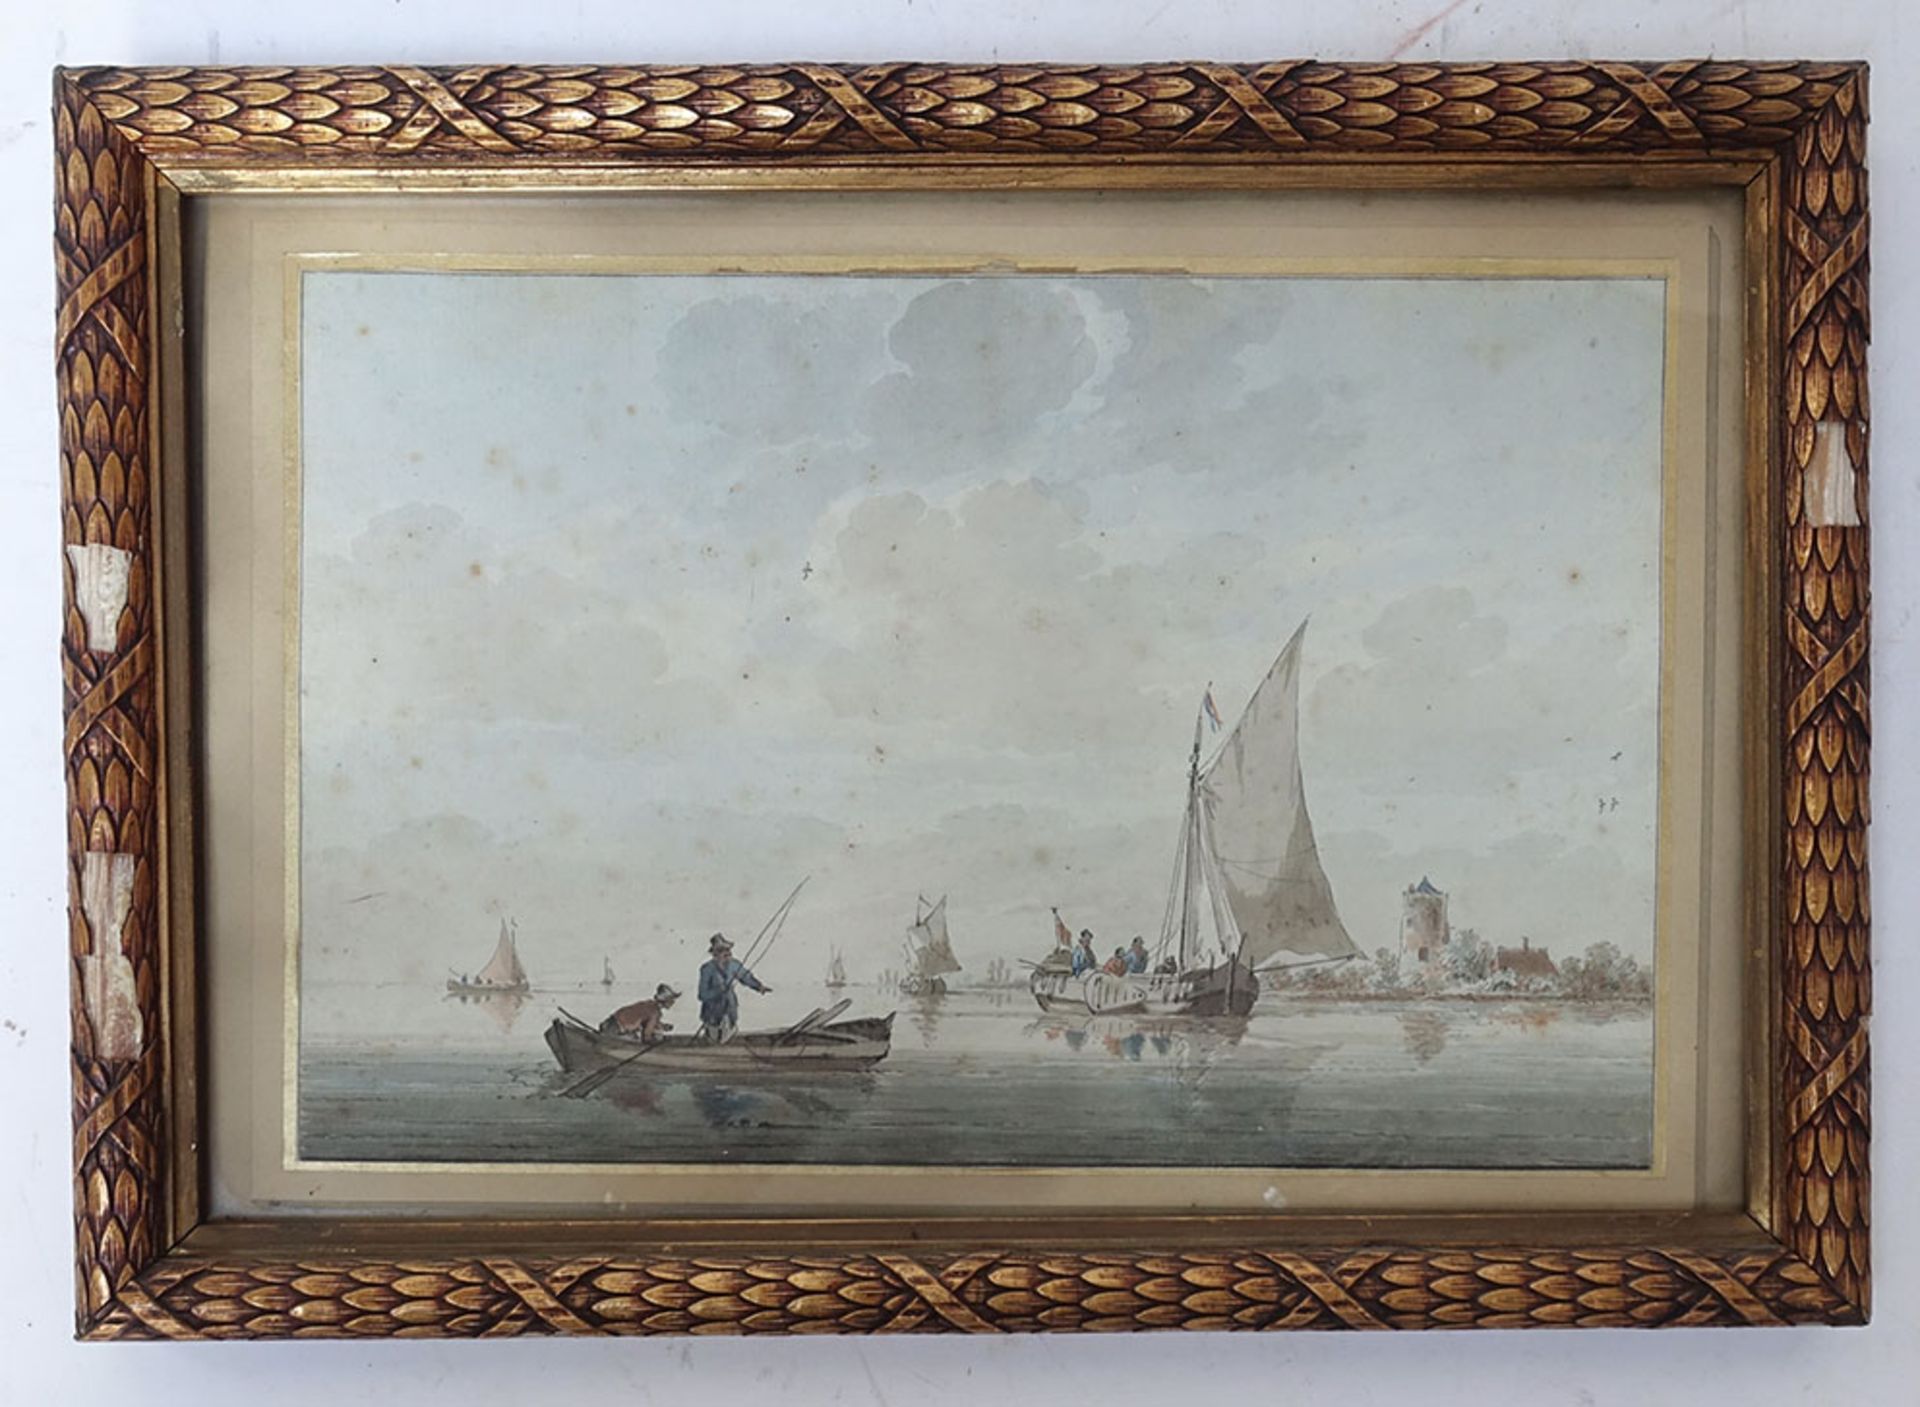 DUTCH SCHOOL, 19th c. -- (Boats on a river, Fishermen in the foreground). Watercolour. 170 x 257 mm.